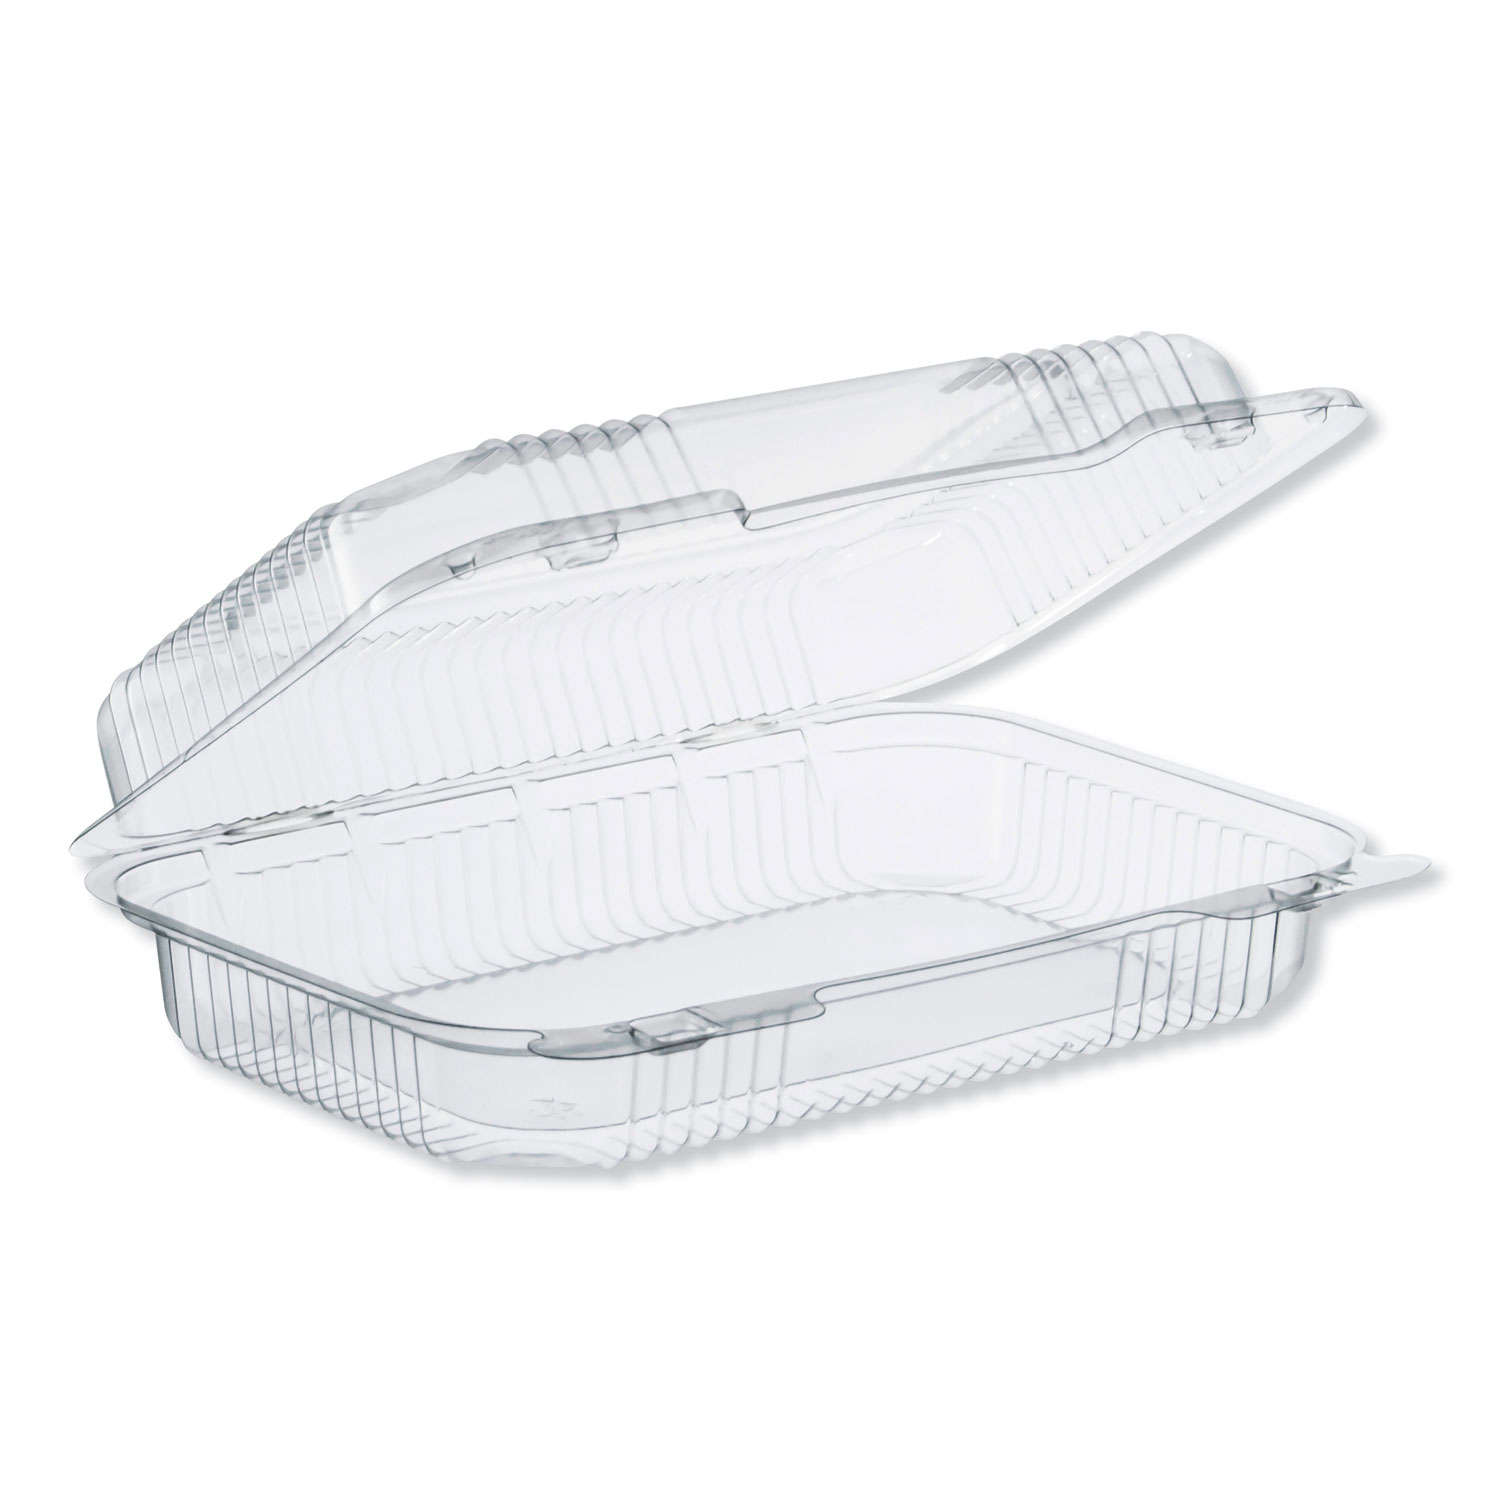  Dart C32UT1 StayLock Clear Hinged Lid Containers, 32 oz, 6.8 x 9.4 x 2.6, Clear, 250/Carton (DCCC32UT1) 